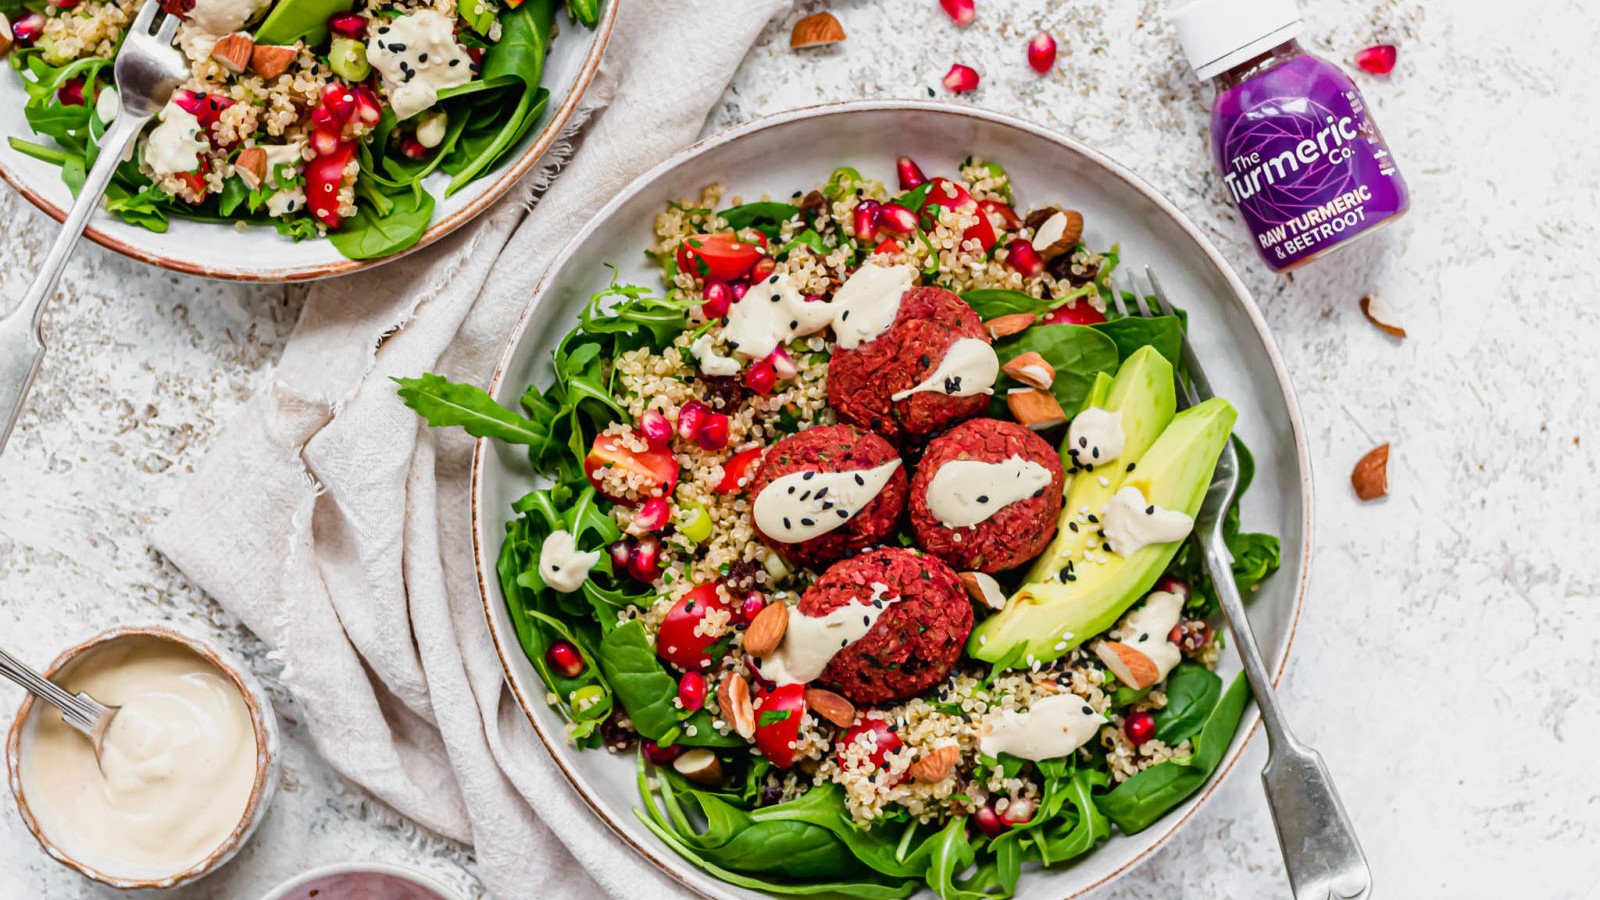 Image of Beetroot Falafel Salad with Spinach, Quinoa and Almonds